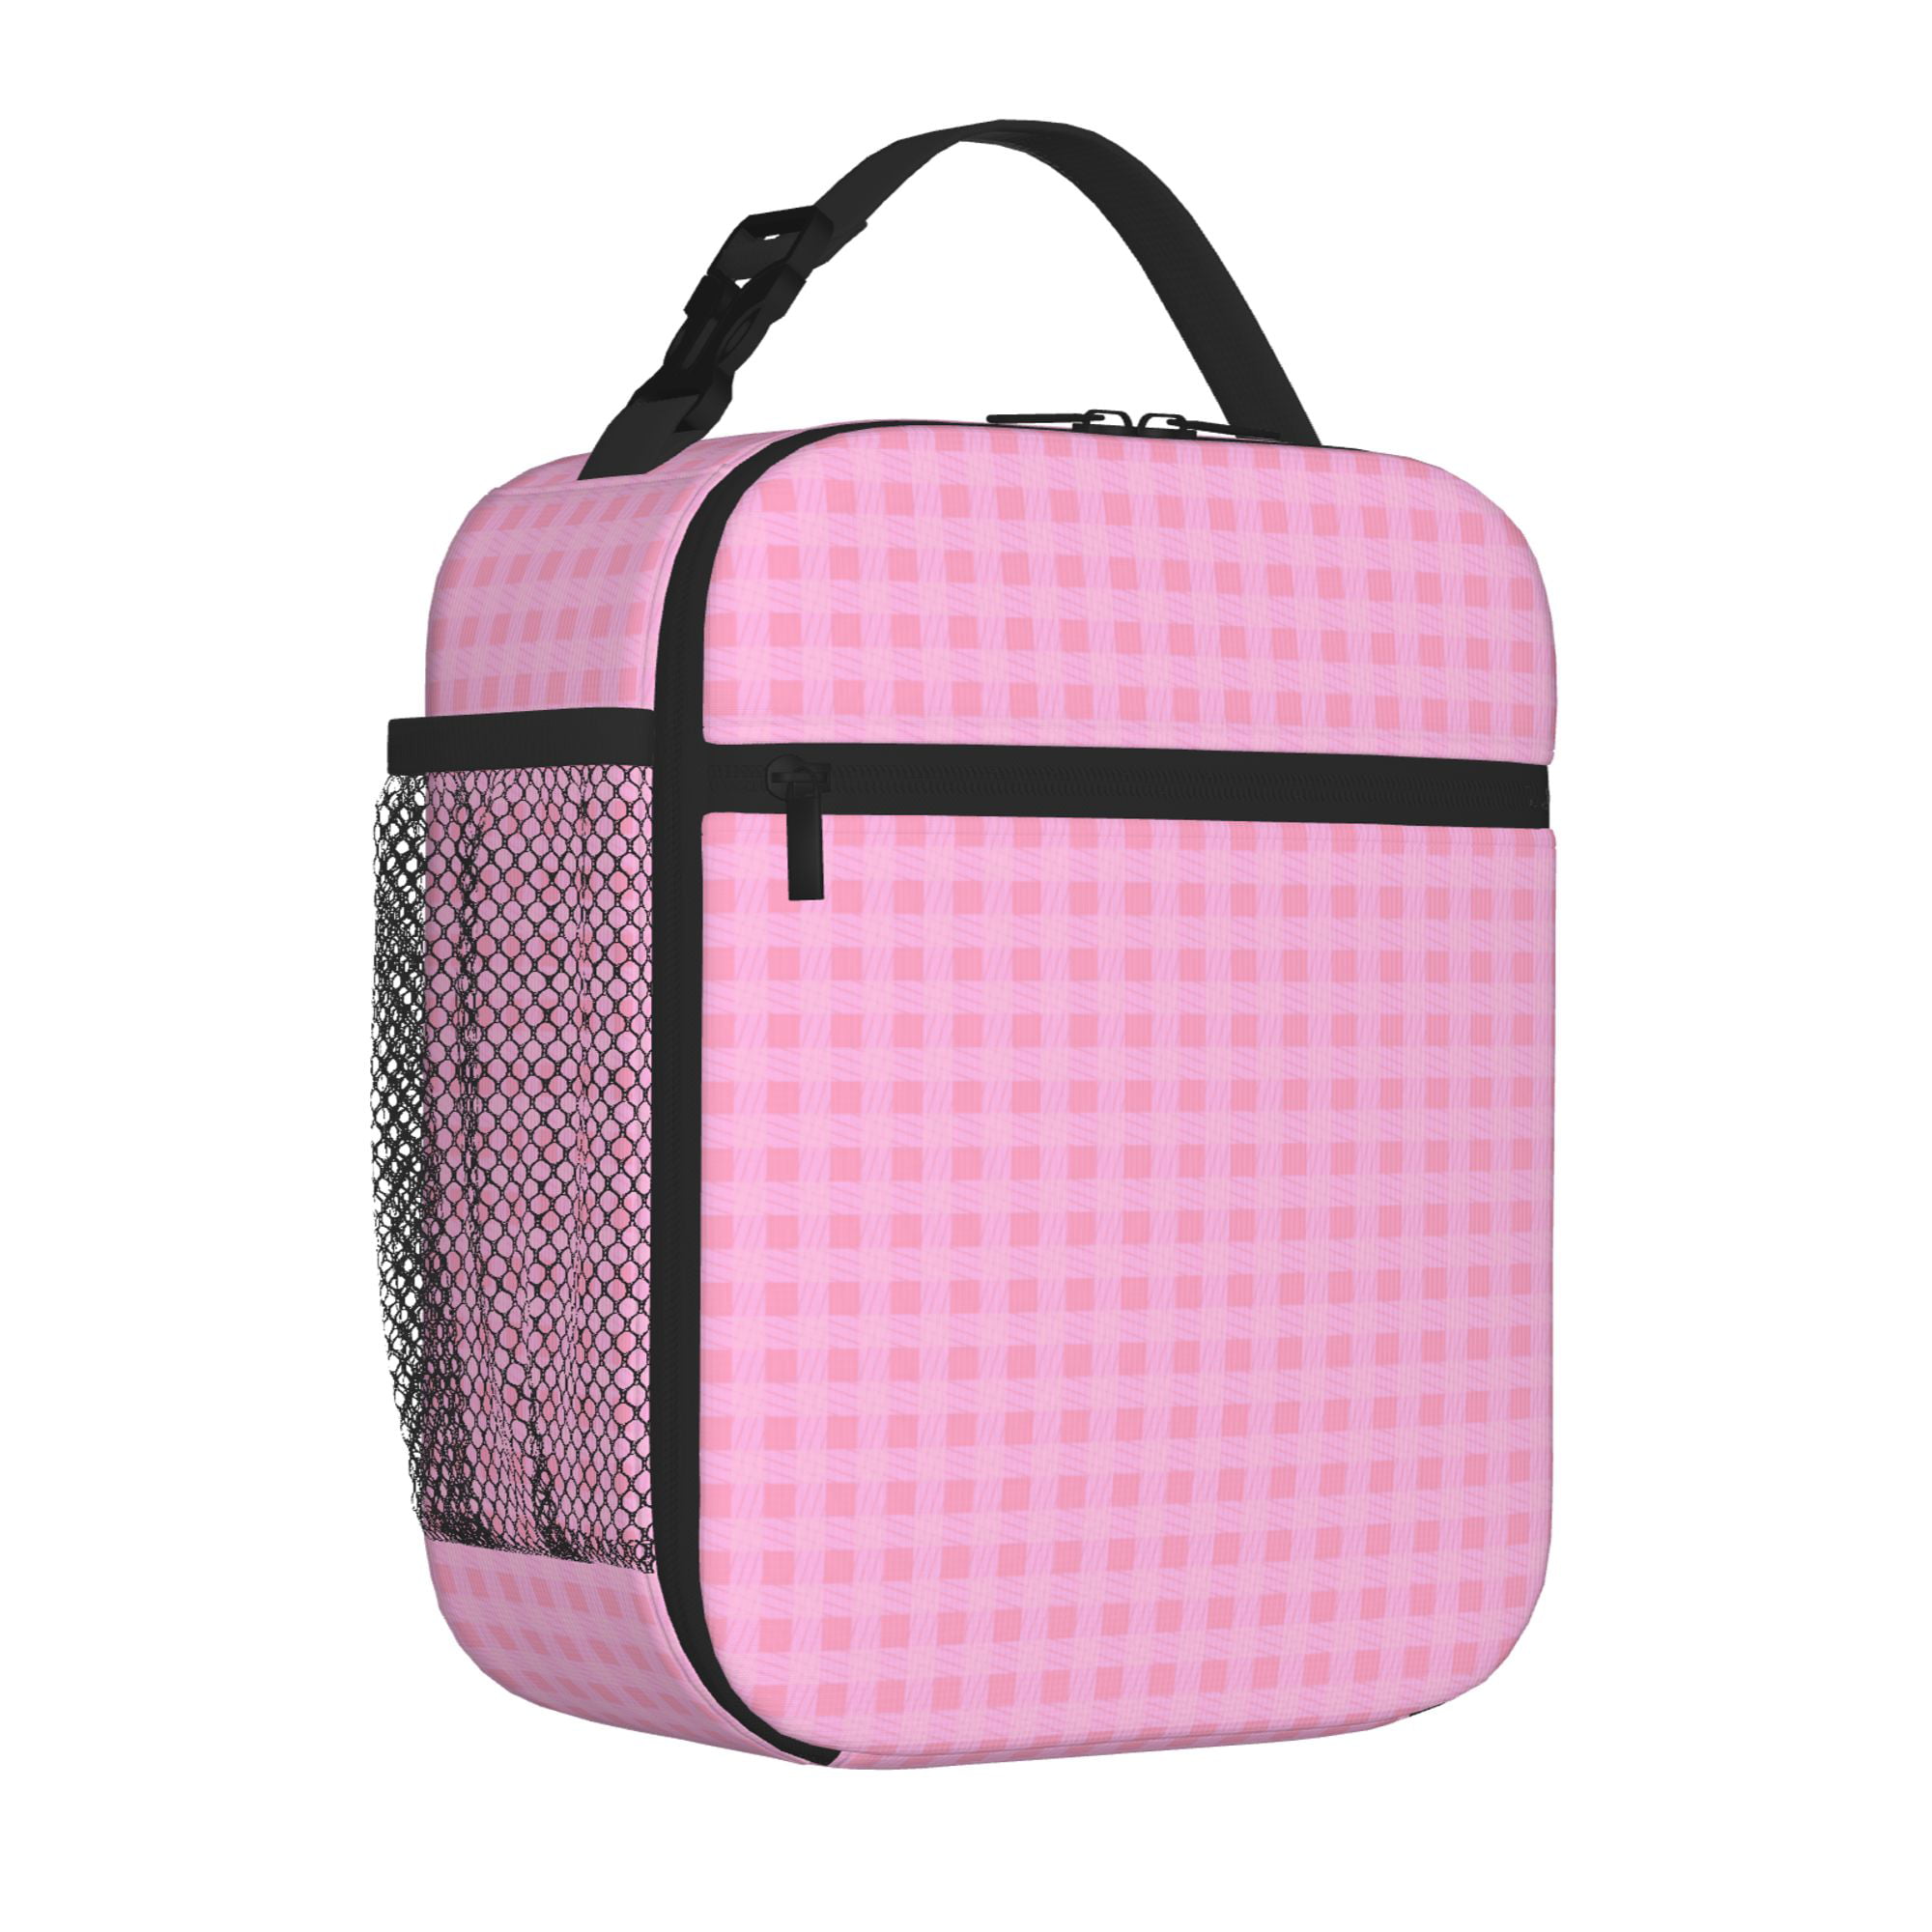 TEQUAN Portable Lunch Bag, Pink Checkered Stripped Pattern Reusable  Insulated Lunch Box for Travel Work School Picnic 